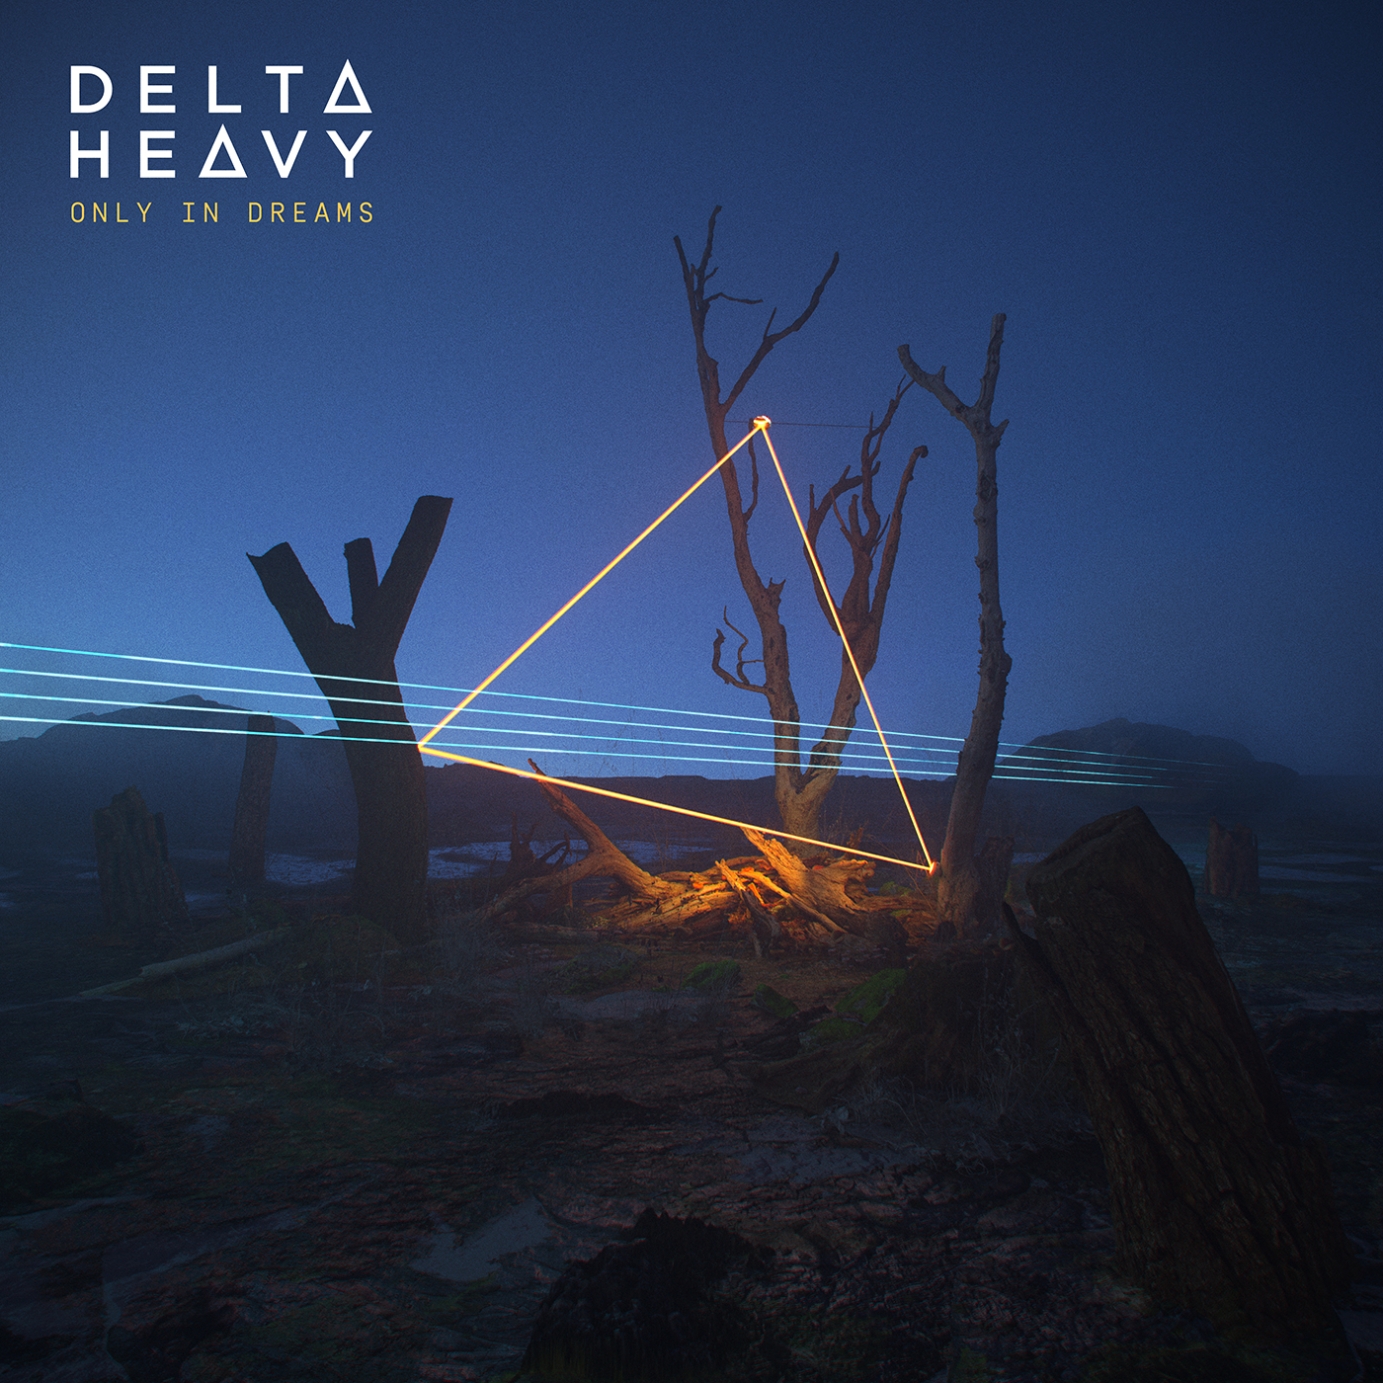 Artwork for Delta Heavy by cape_and_monocle